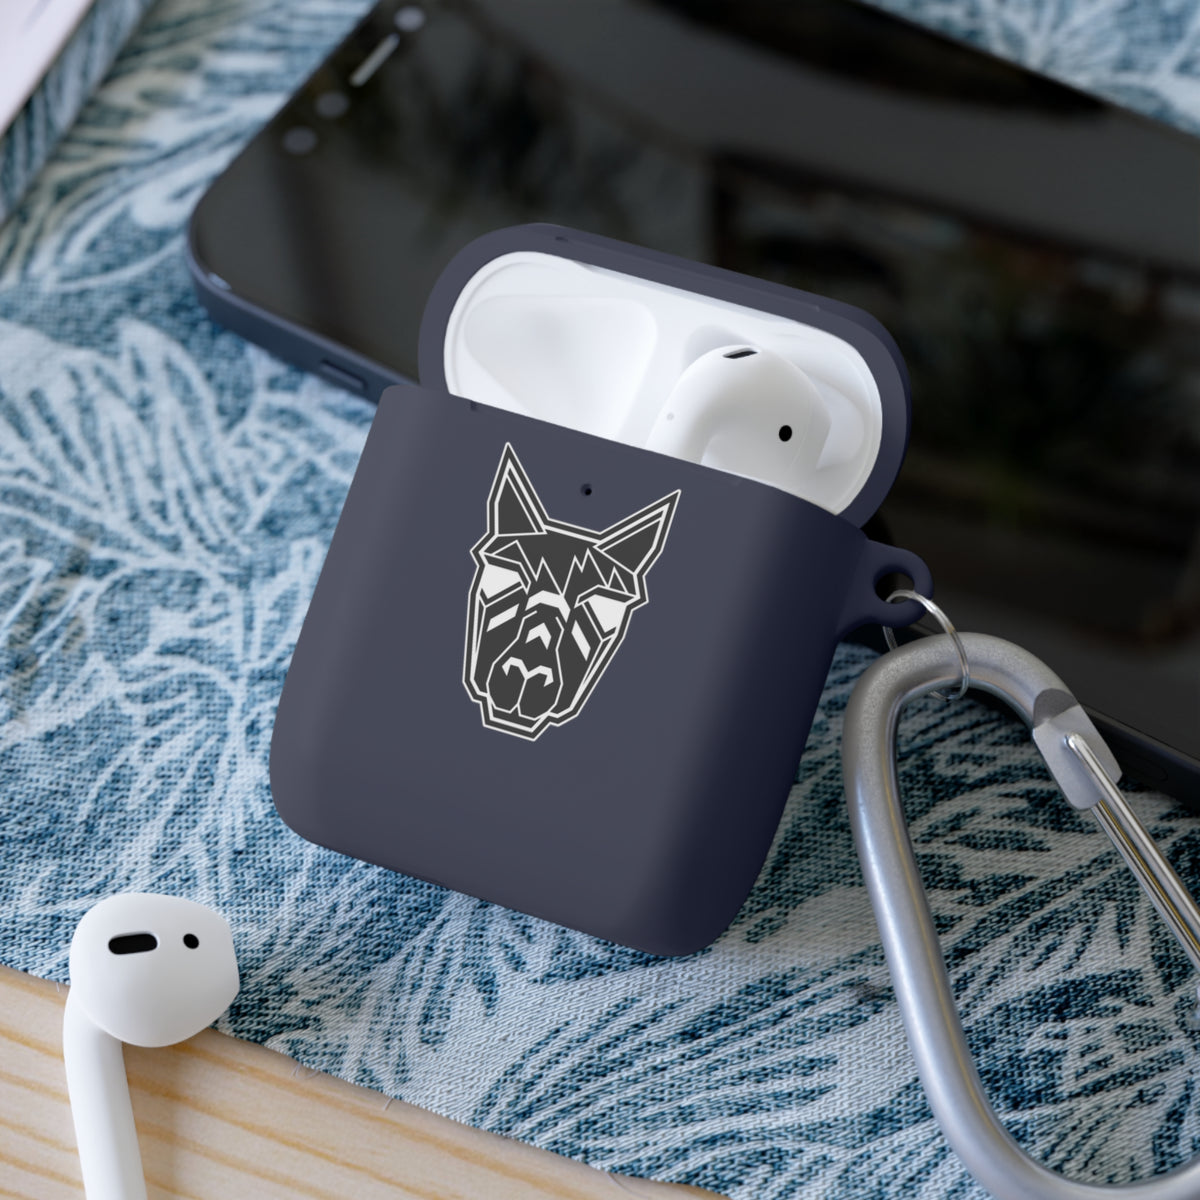 AlpaKa - AirPods and AirPods Pro Case Cover